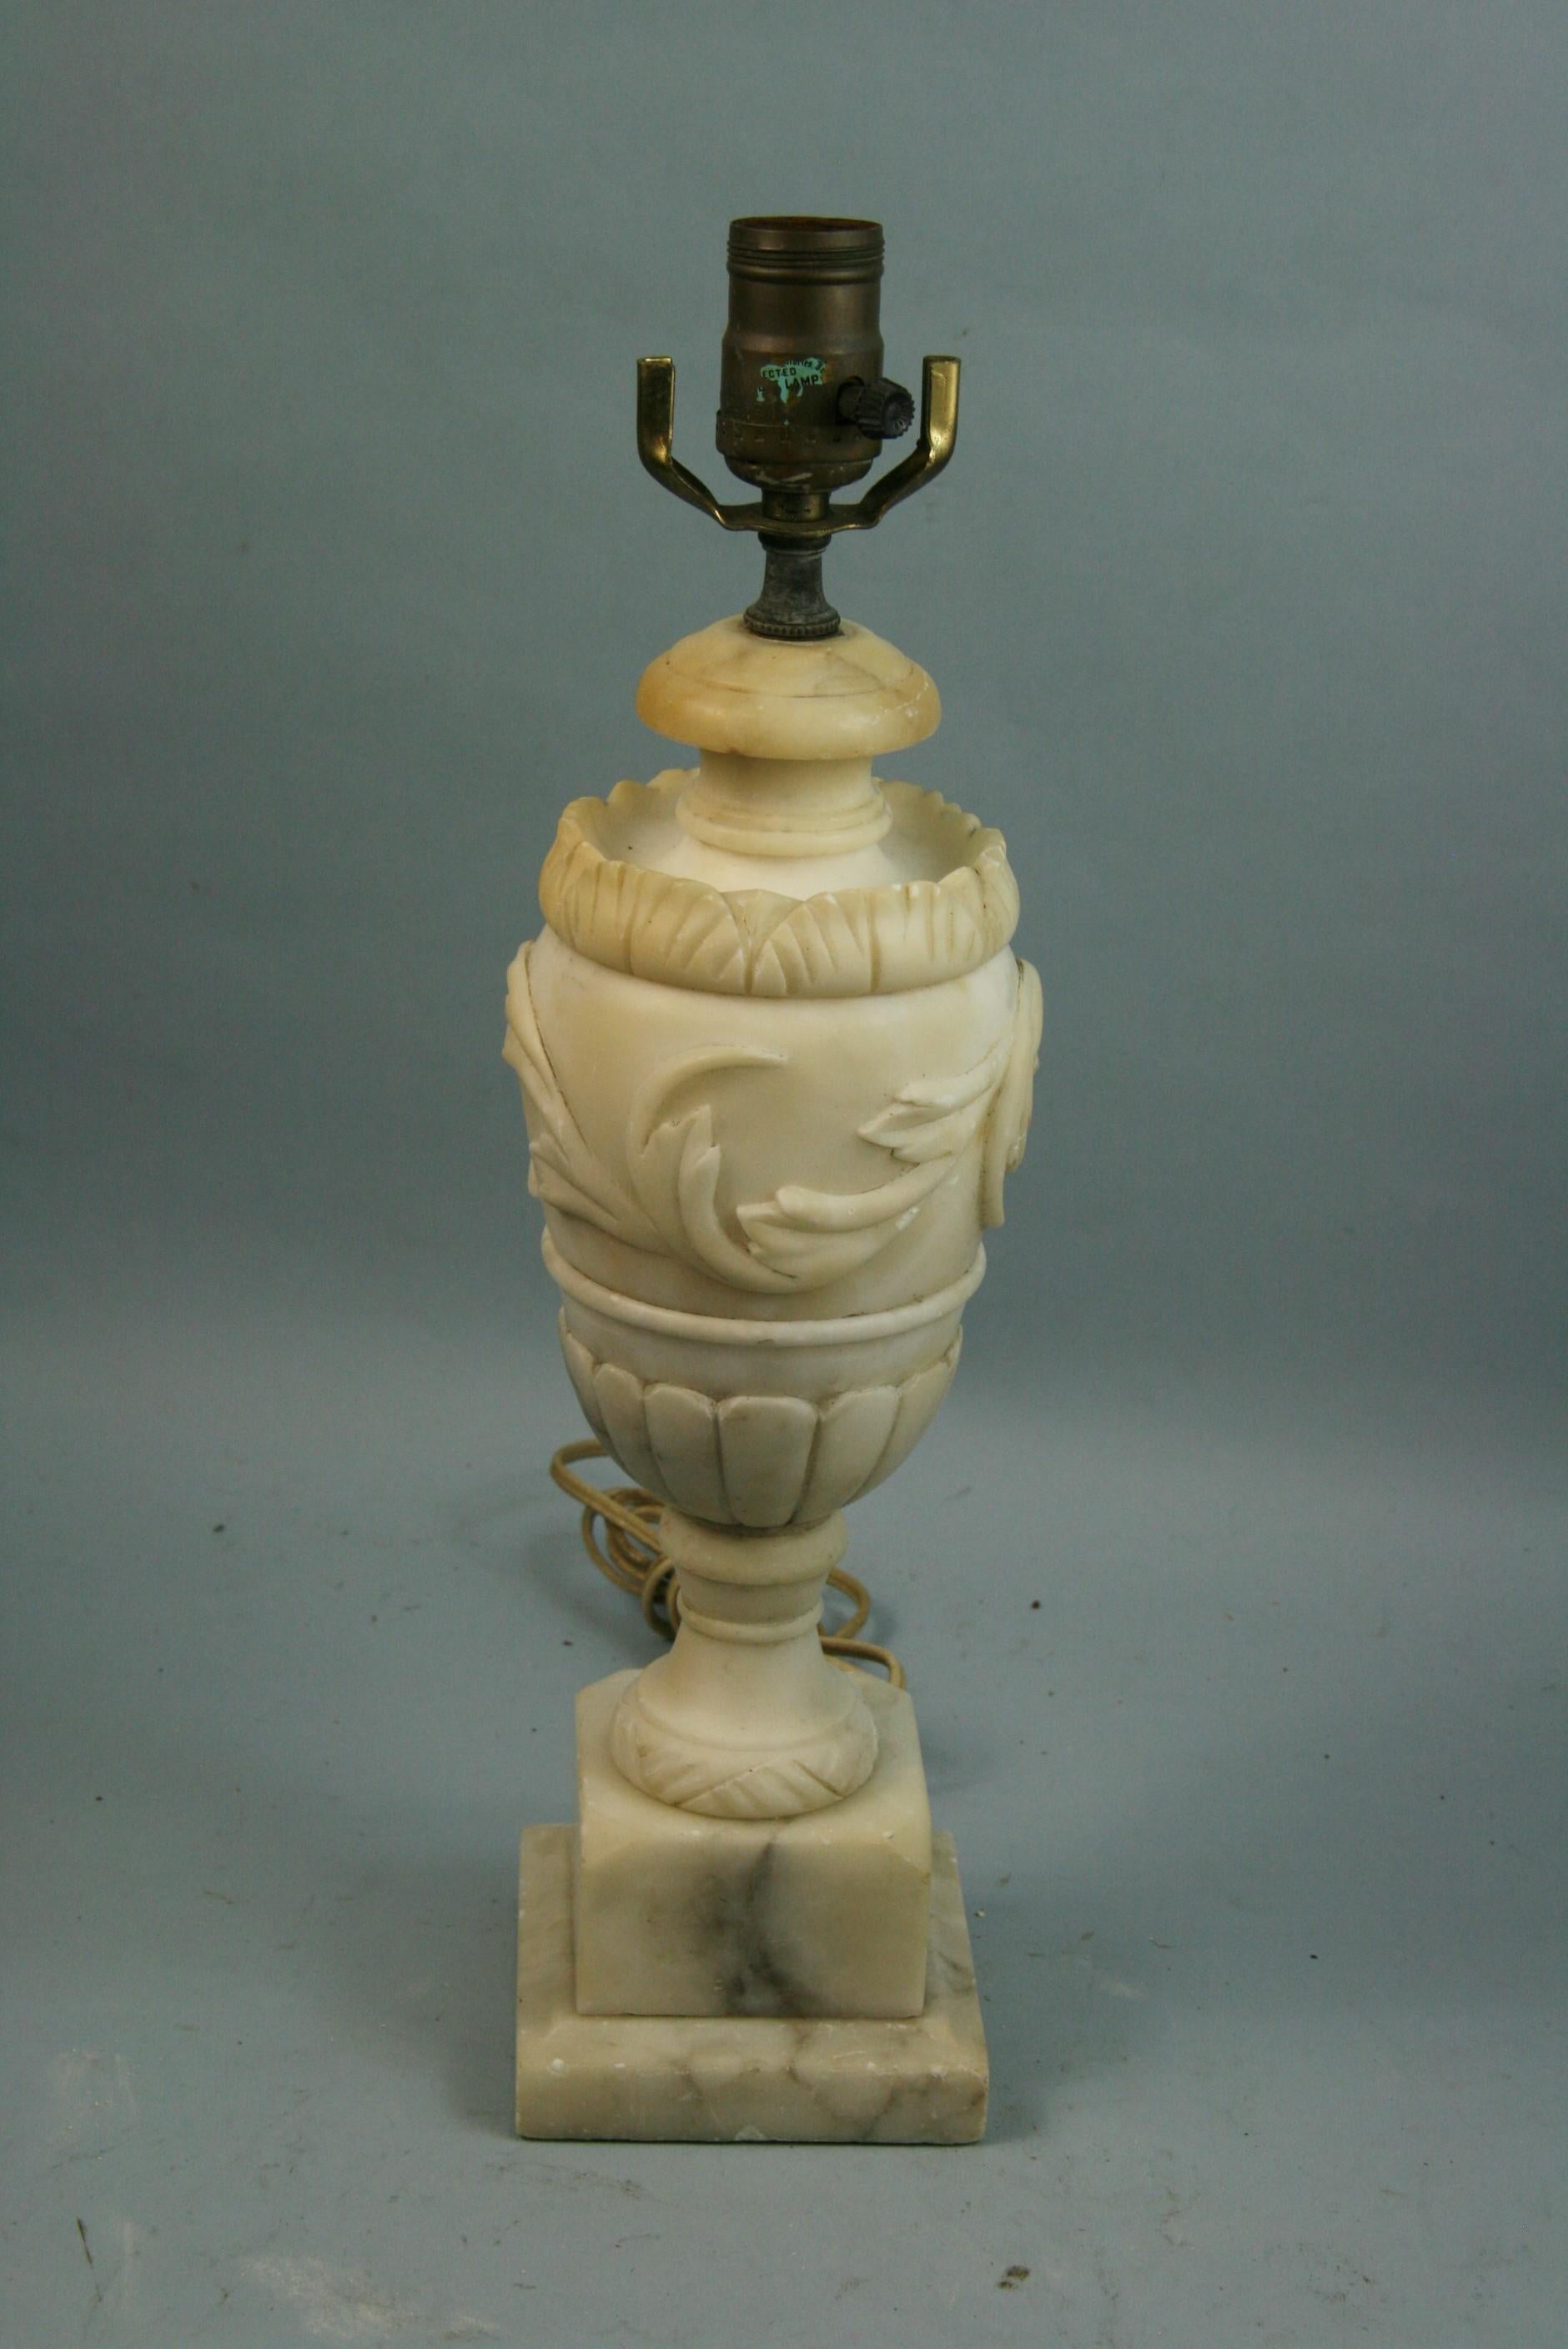 3-737 Italian alabaster lamp with leaf motif
Height to top of socket 17